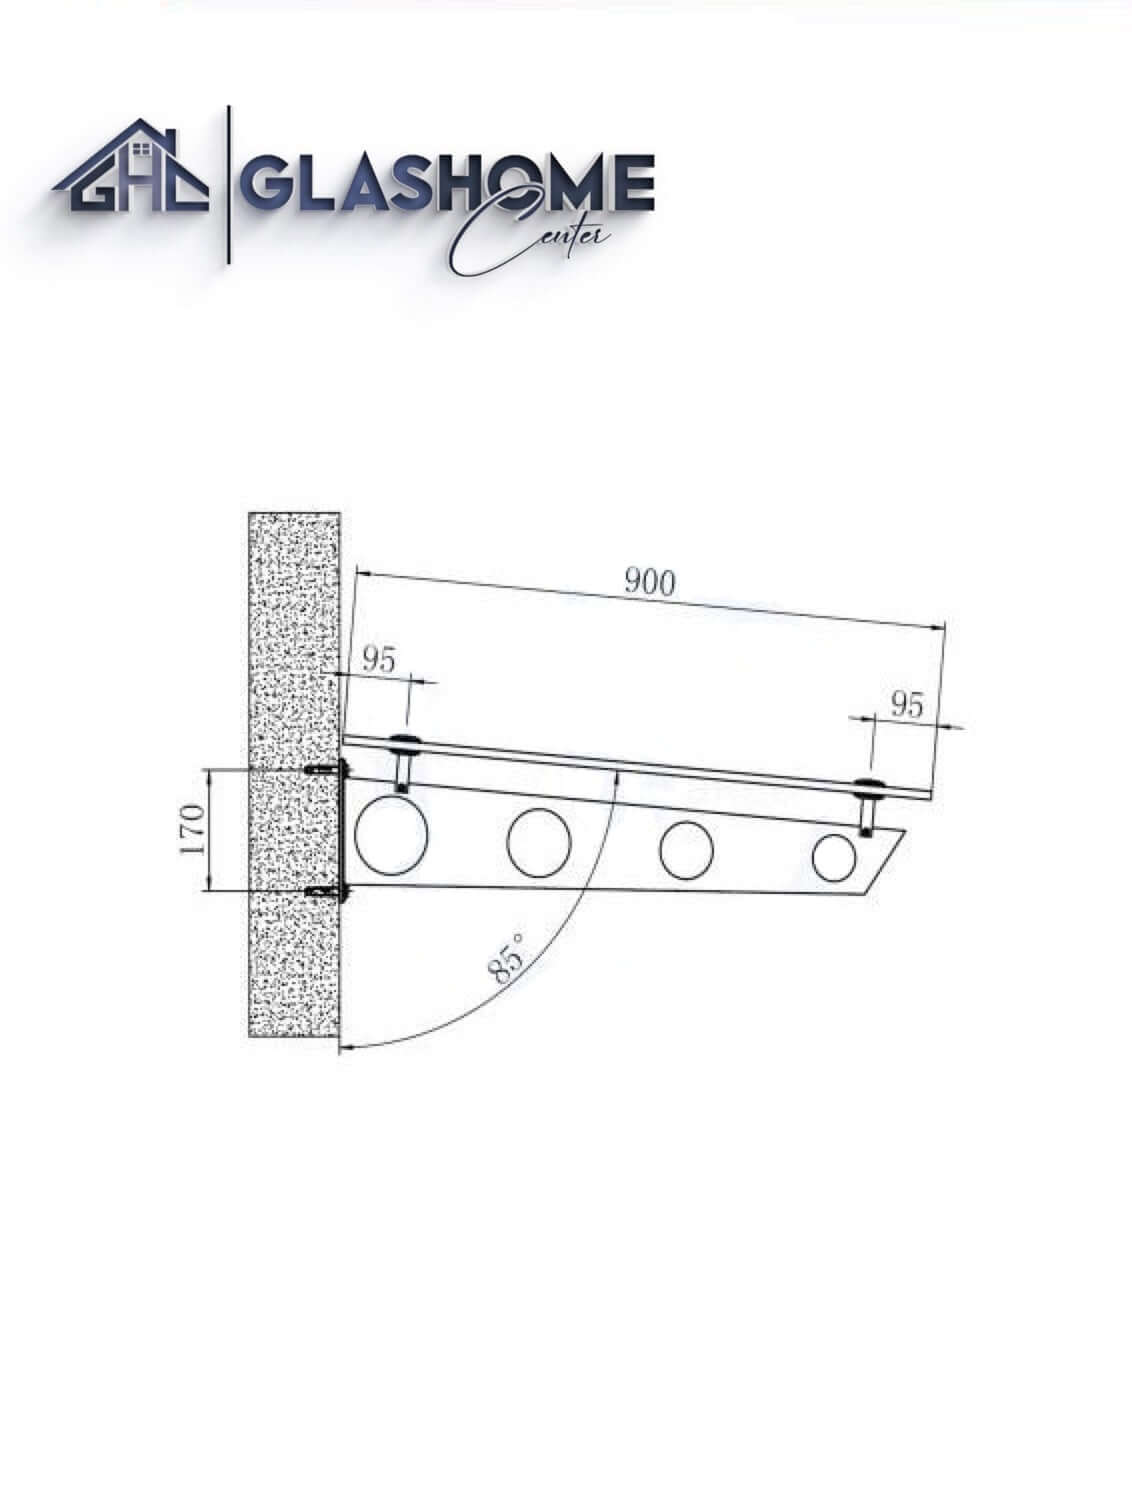 GlasHomeCenter - glass canopy - gray glass - 120x90cm - 13.1mm laminated safety glass - incl. 2 stainless steel brackets variant "Stockholm"